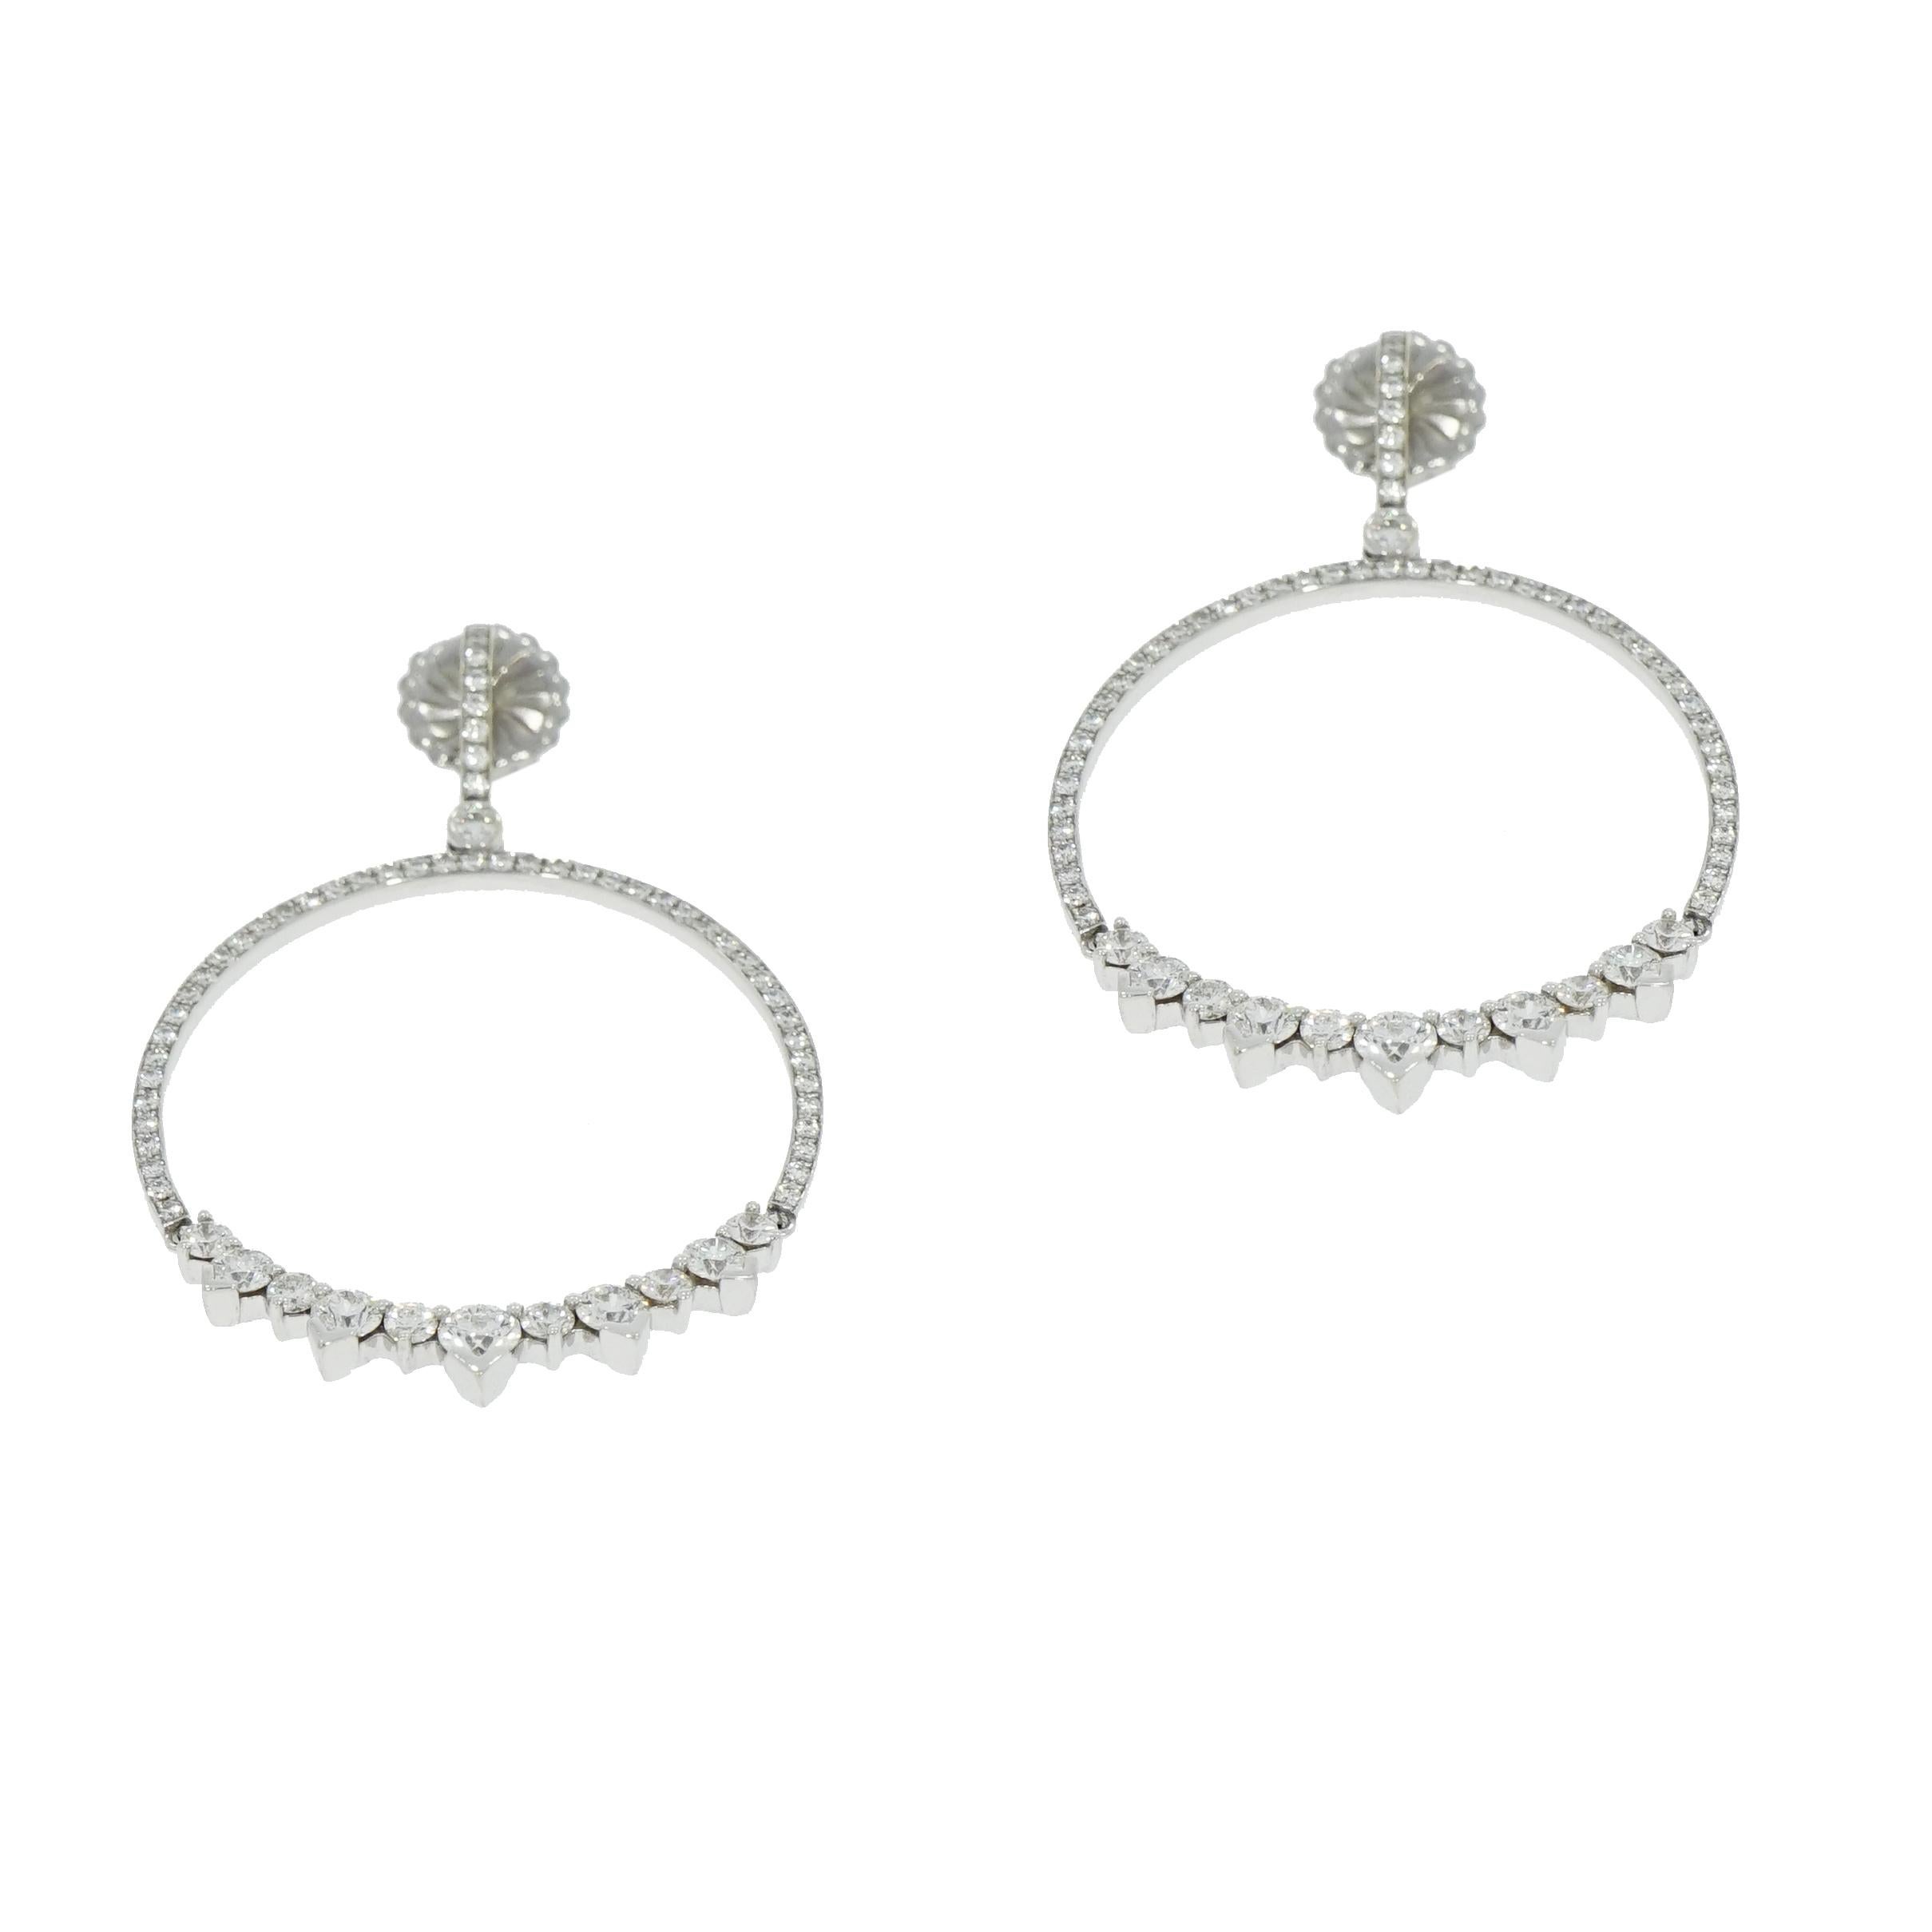 A truly timeless, yet chic design, this Aerial Eclipse Earrings are crafted by Hearts On Fire in 18k white gold and 3.25 carat of Diamonds total, with a post and friction backs. 
The sophisticated look of this diamond earrings with subtle drops